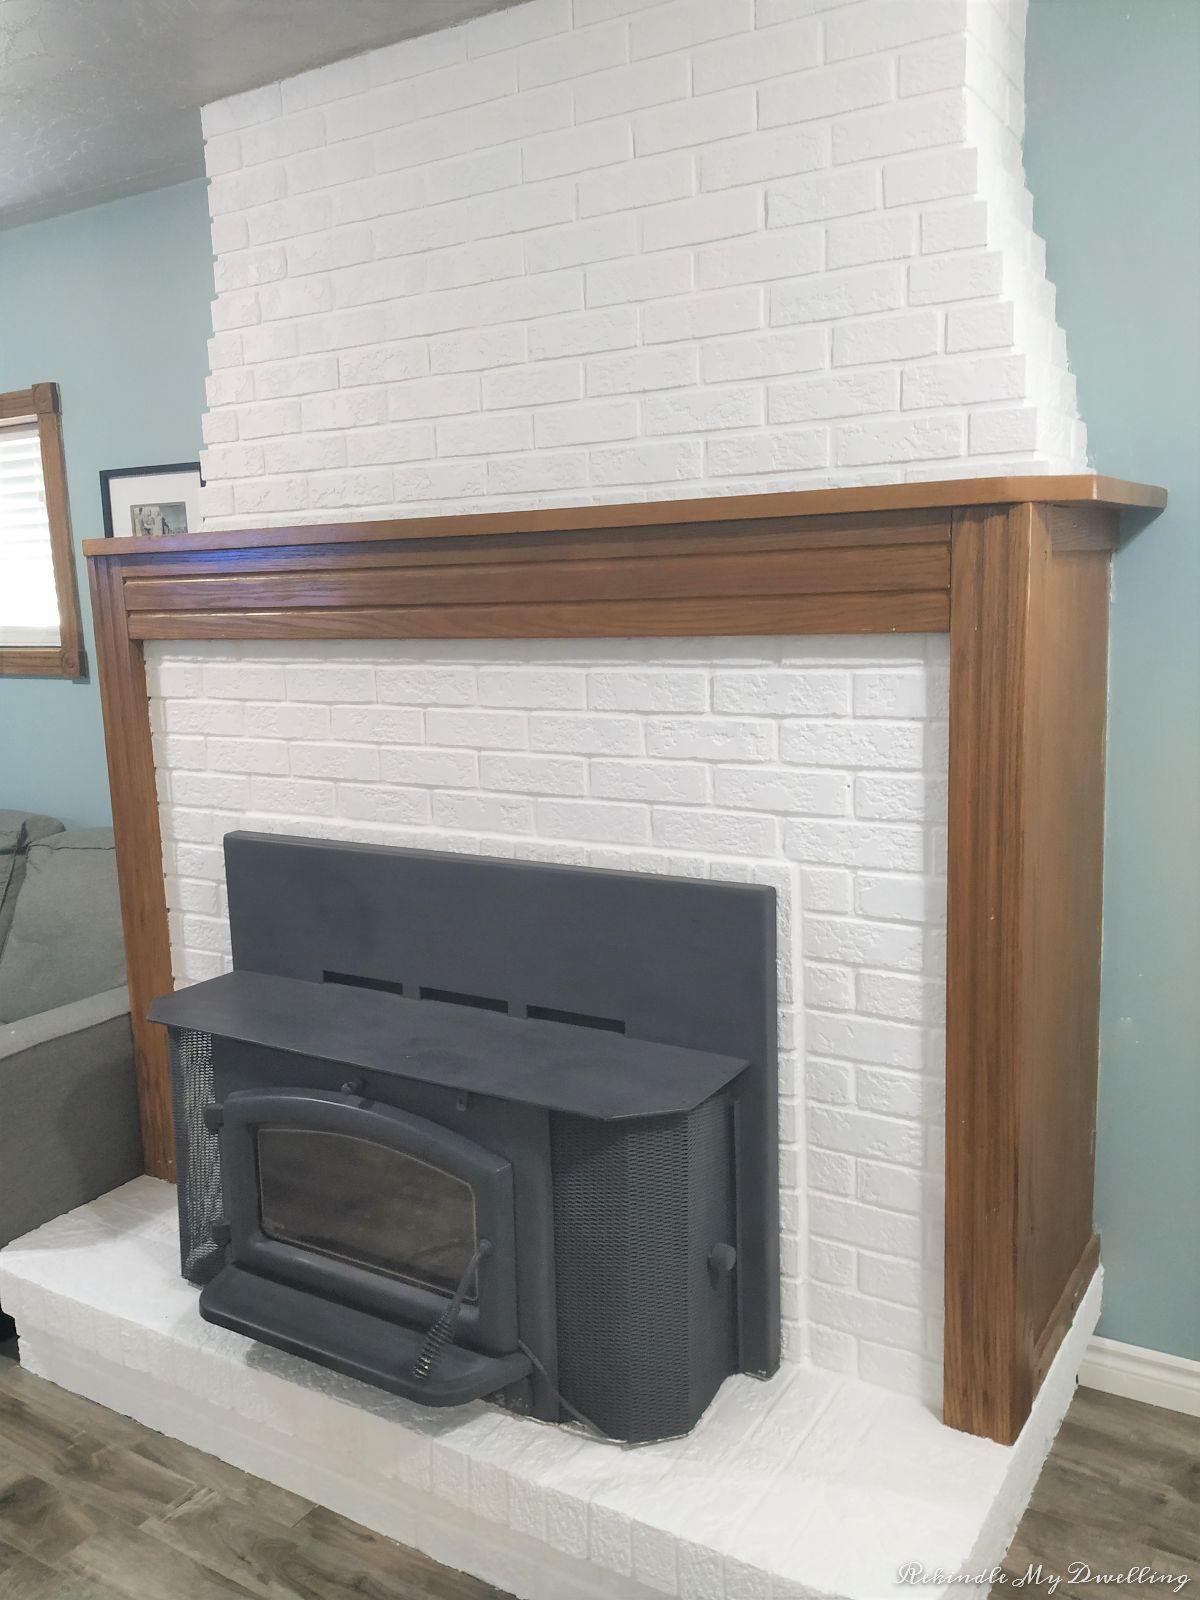 Side view of brick fireplace makeover.